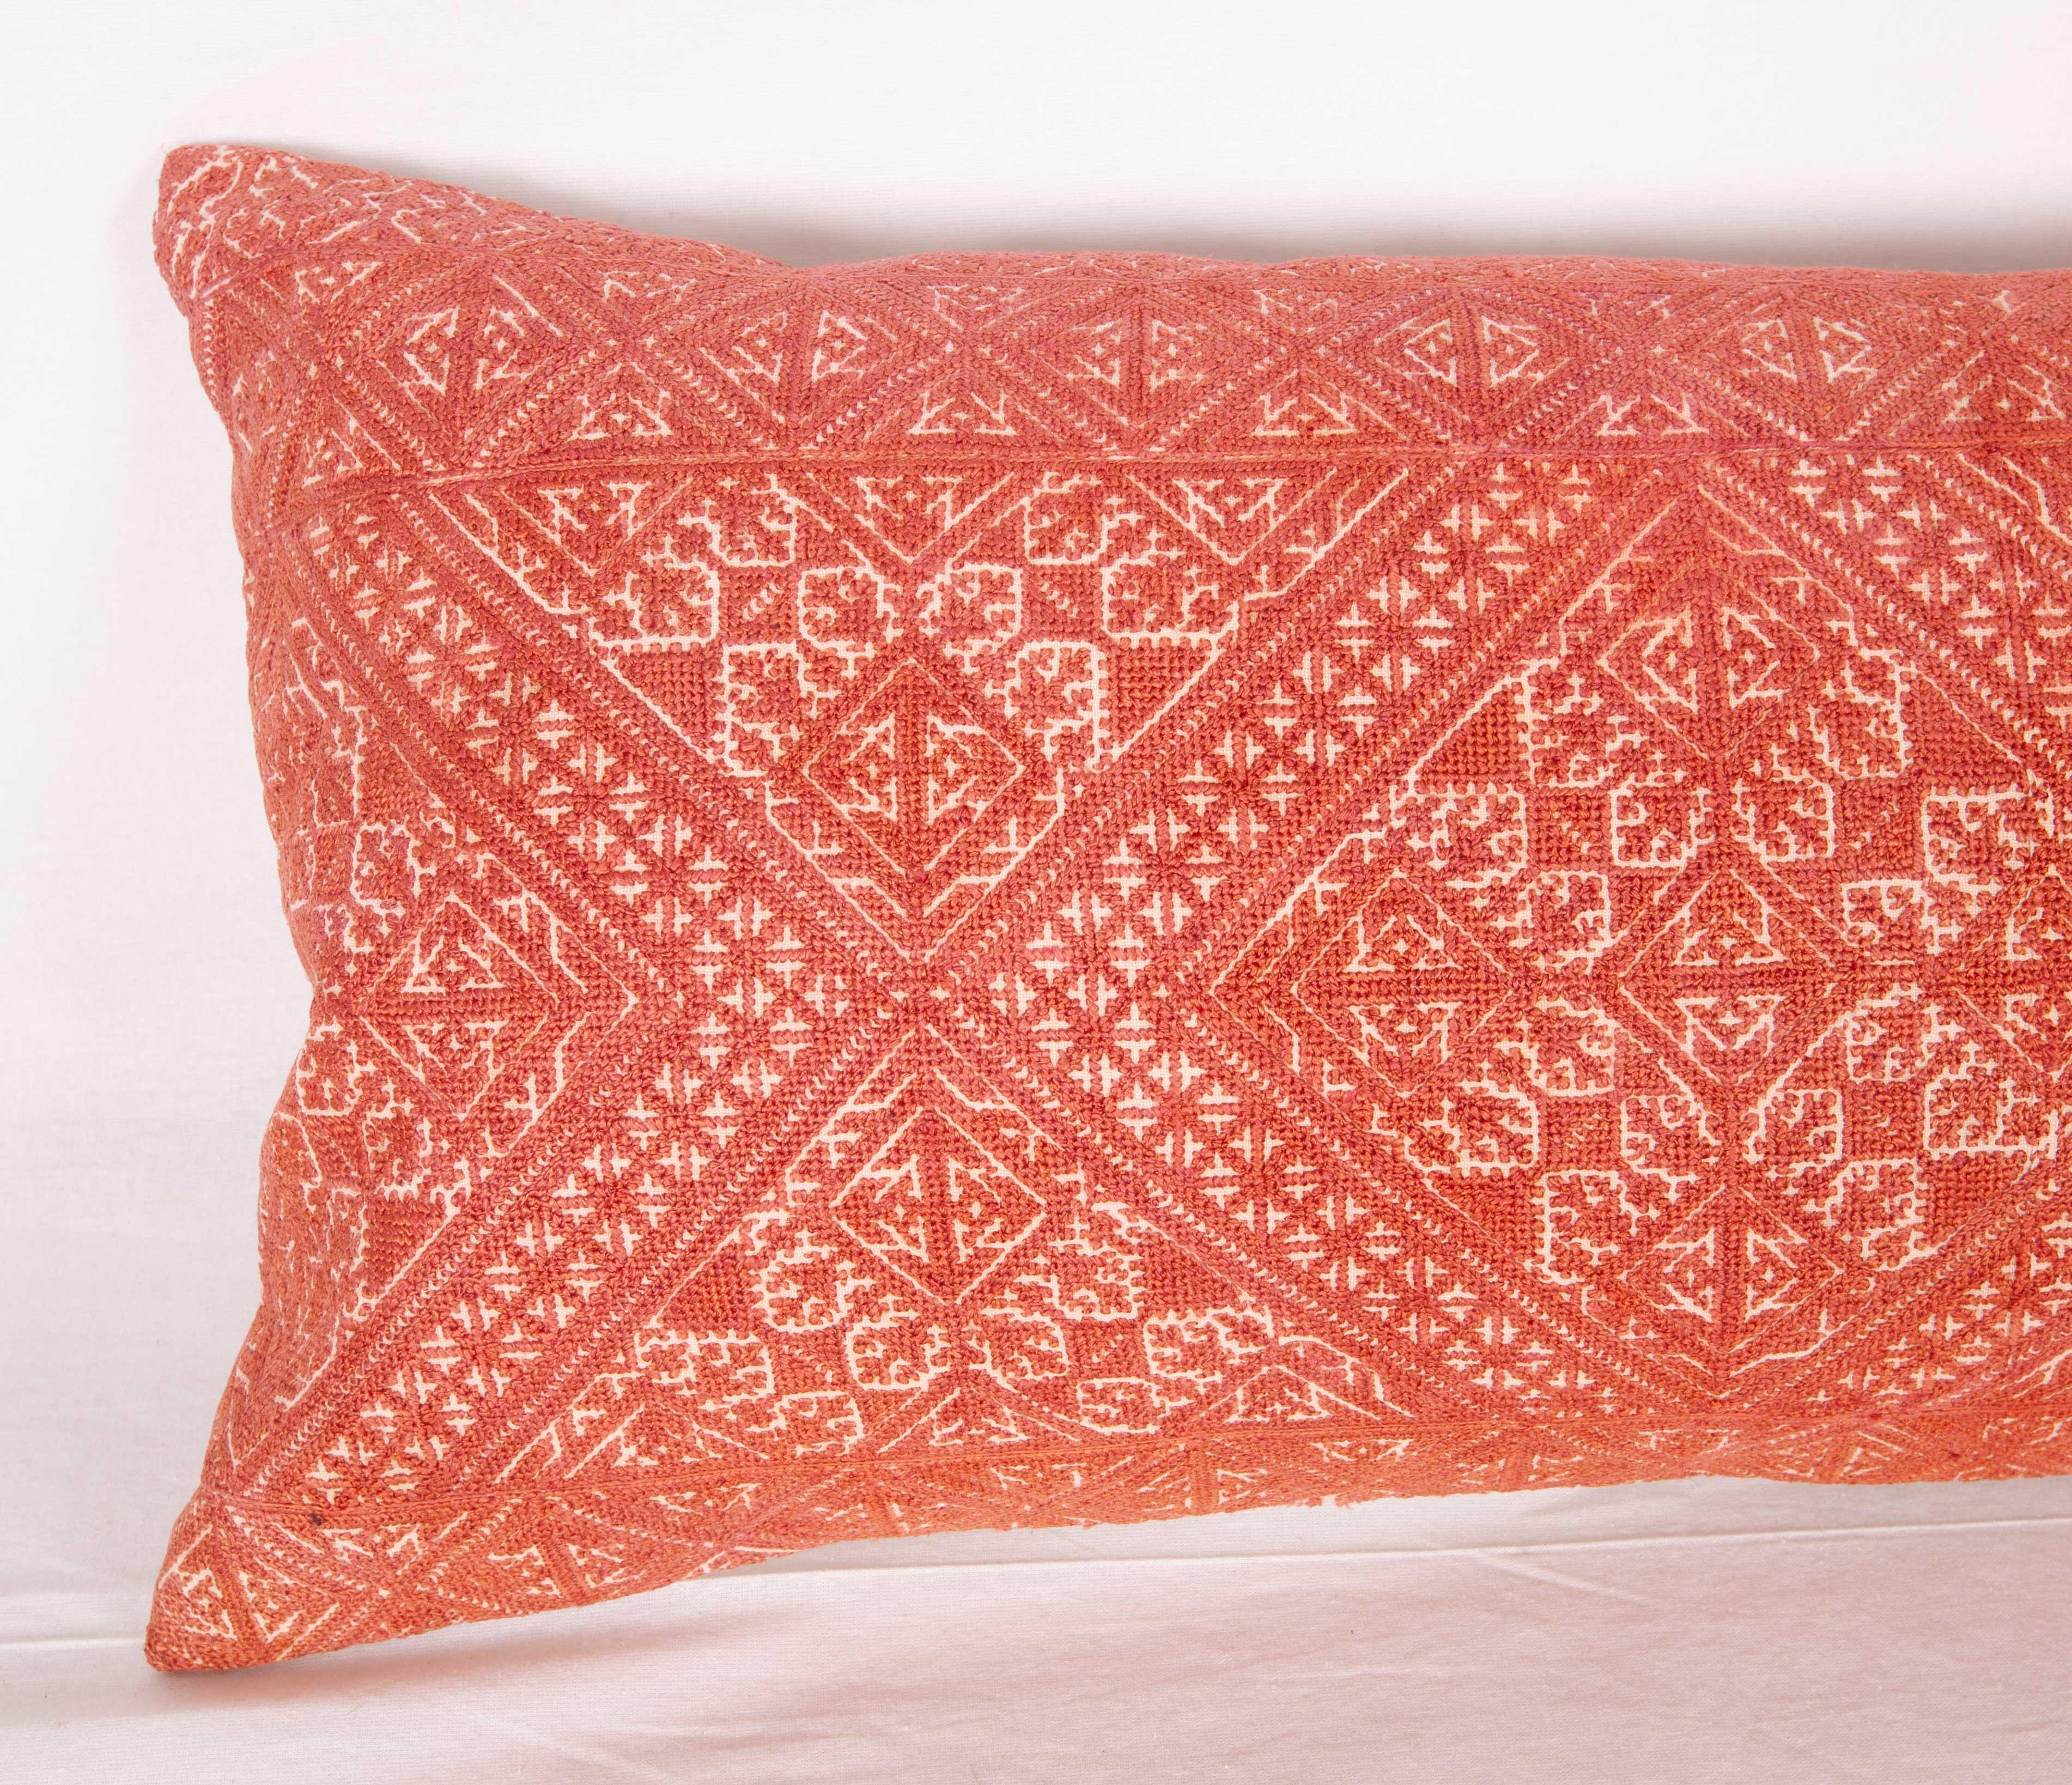 Suzani Antique Lumbar Pillow Case Made from an Early 20th Century Fez Embroidery